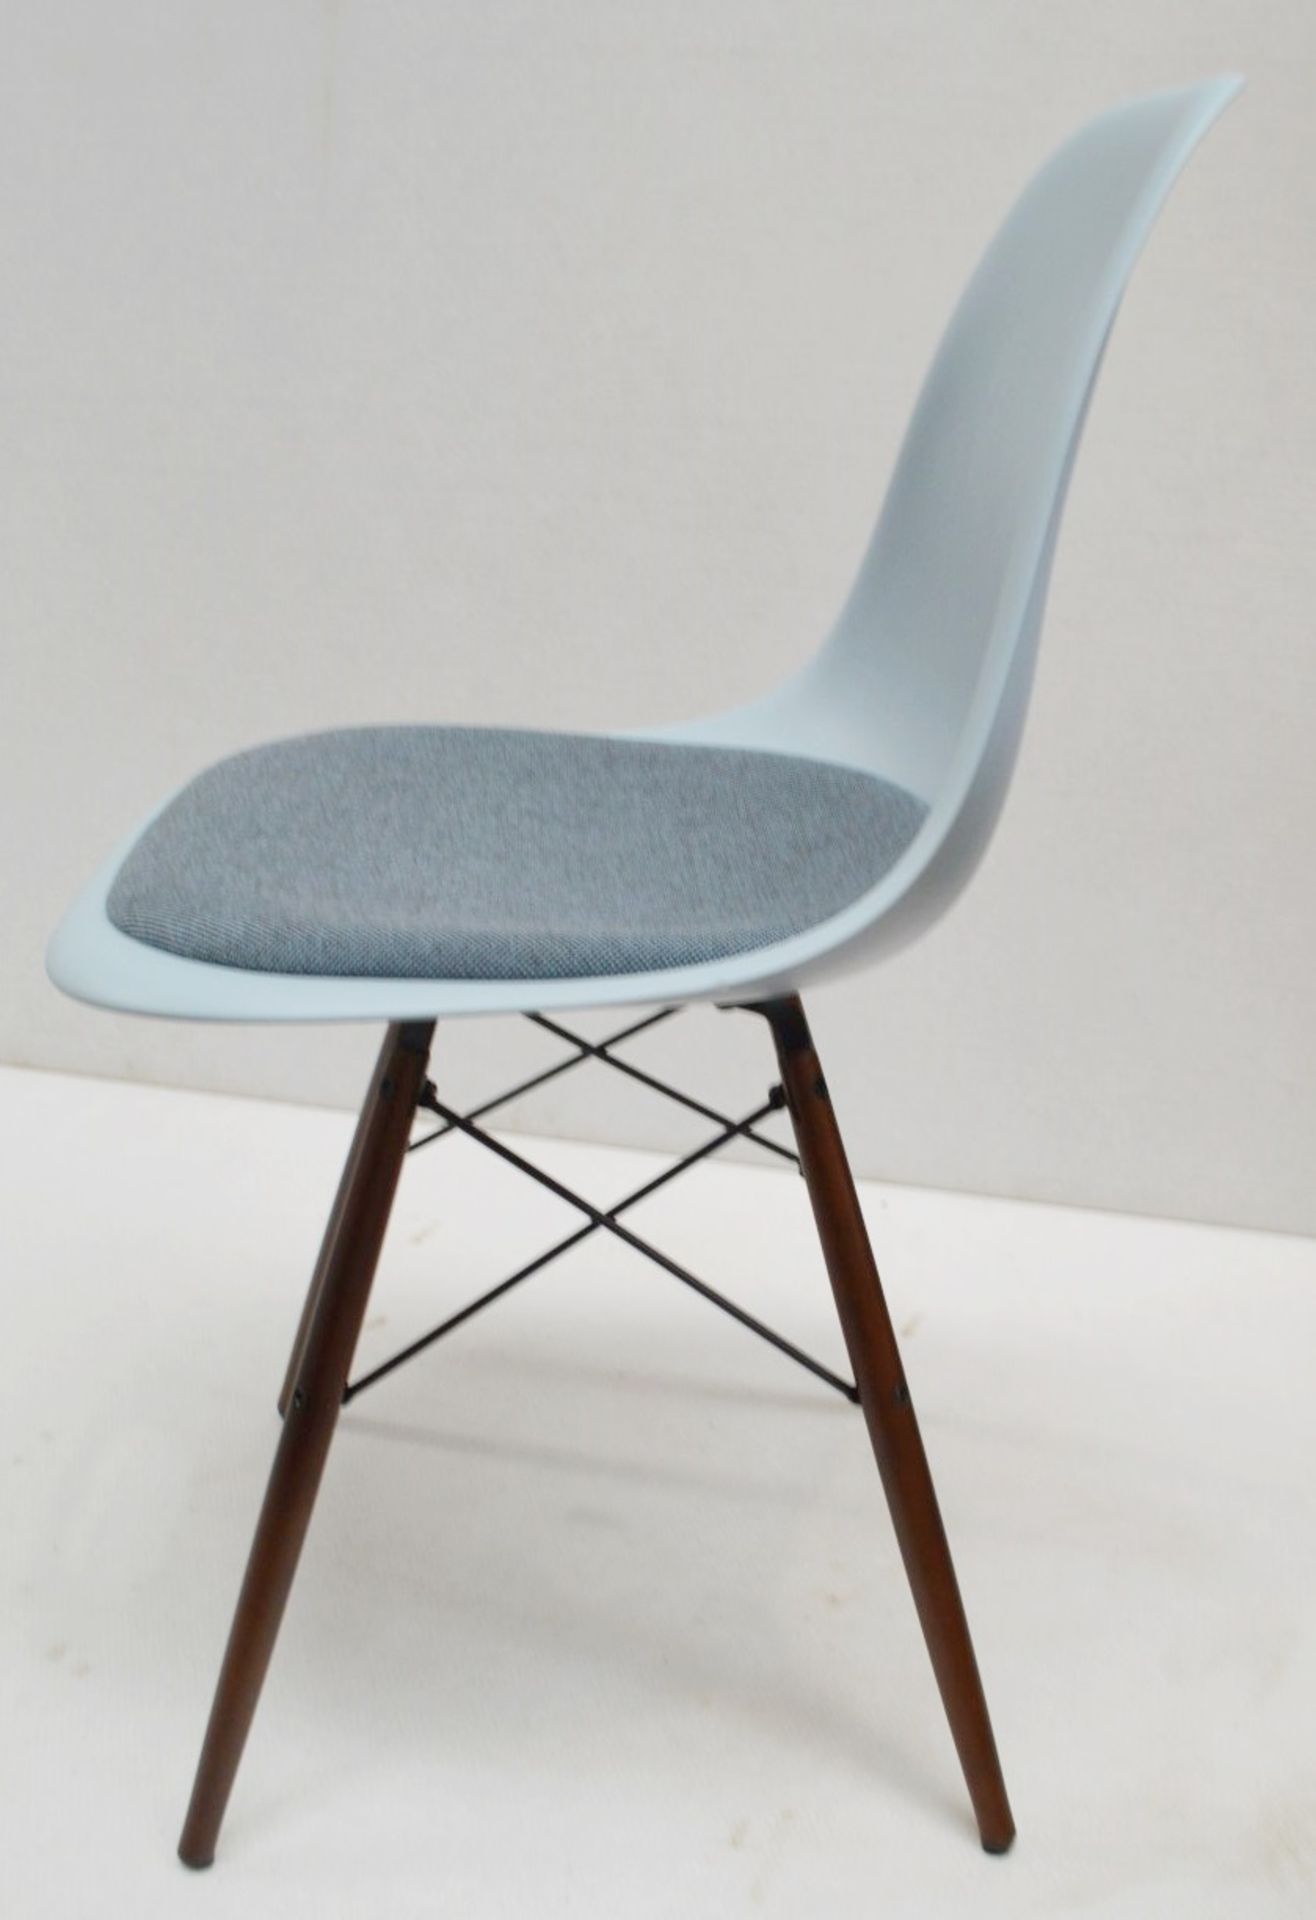 1 x VITRA Eames DSW Designer Chair With Upholsted Seat And Maple Base In A Dark Stain - Image 2 of 9